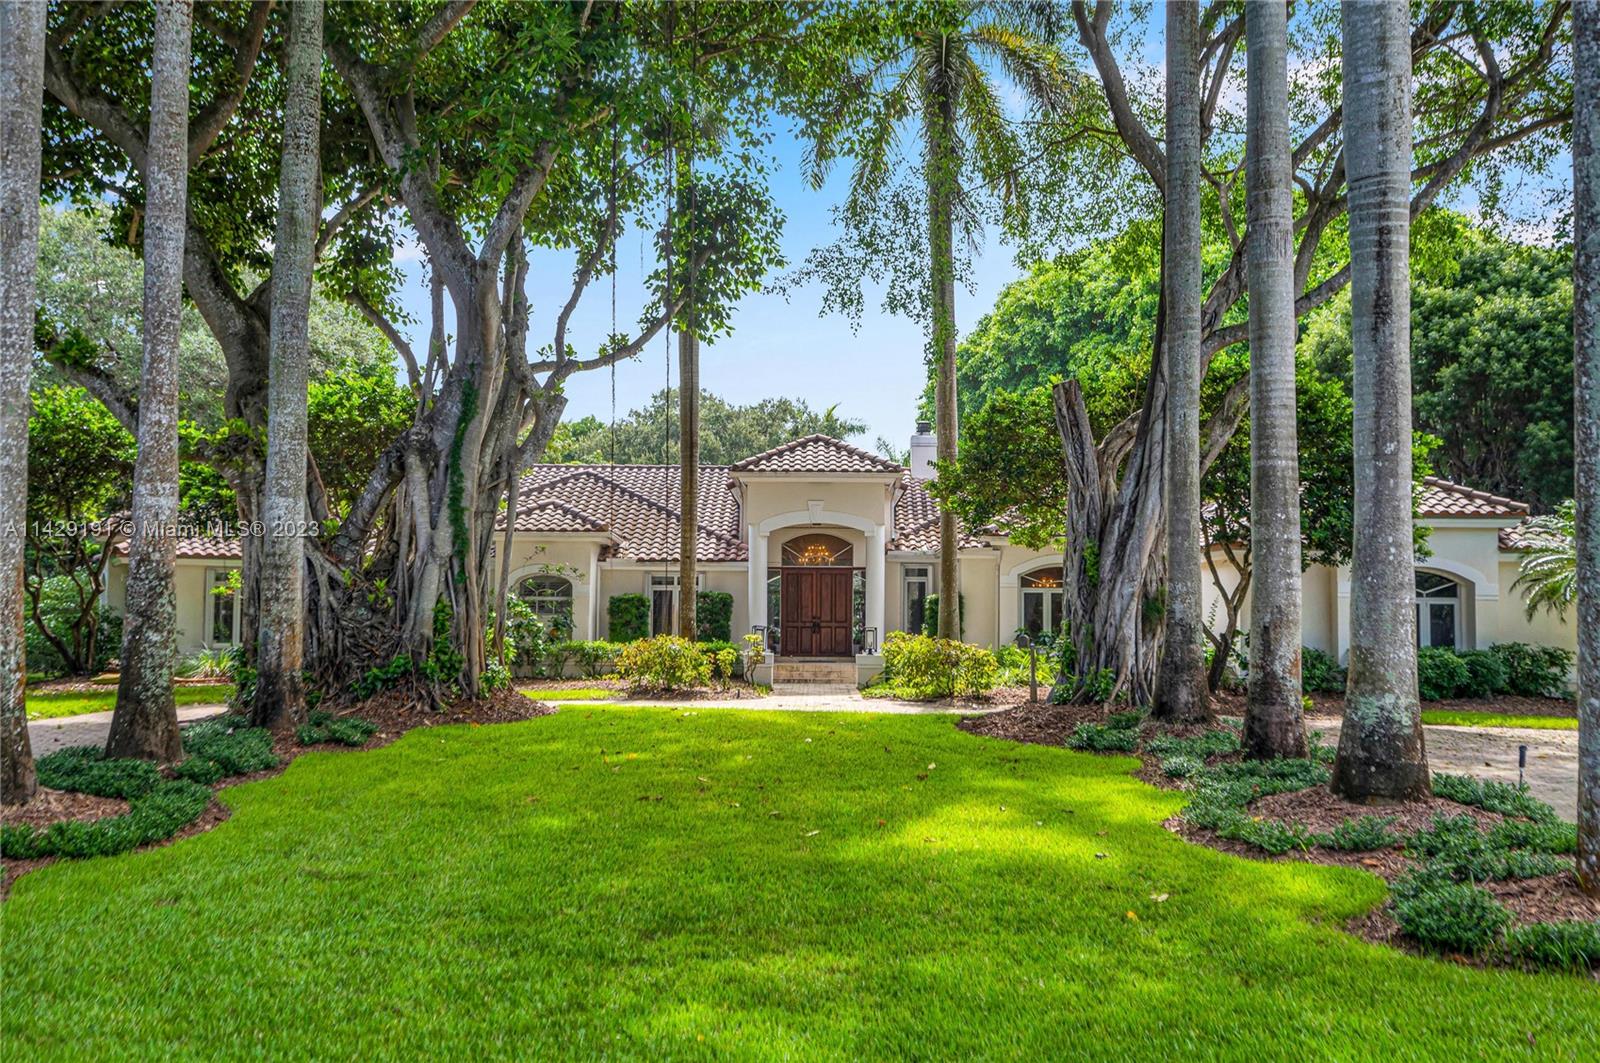 Luxurious one story estate located on the most charming and picturesque street in North Pinecrest. This custom built residence boasts 6 Beds 5 ½ Baths, large kitchen w/ island, huge family room formal dining room, elegant living room, gym & oversized 3-car garage complete w/ charging station. Sits on 1.2 acres w/ 5,576SF LA it has multiple areas to relax & entertain. The open main living spaces have high ceilings, pool & garden views. French doors open out onto a magnificent garden laden w/ fruit trees and flowering plants making it a perfect setting to entertain. Nestled off the secluded backyard is a sparkling saltwater pool & jacuzzi, summer kitchen with outdoor dining a perfect setting for parties, large or small w/ plenty of room for tennis/pickle ball court. A home that has it all.